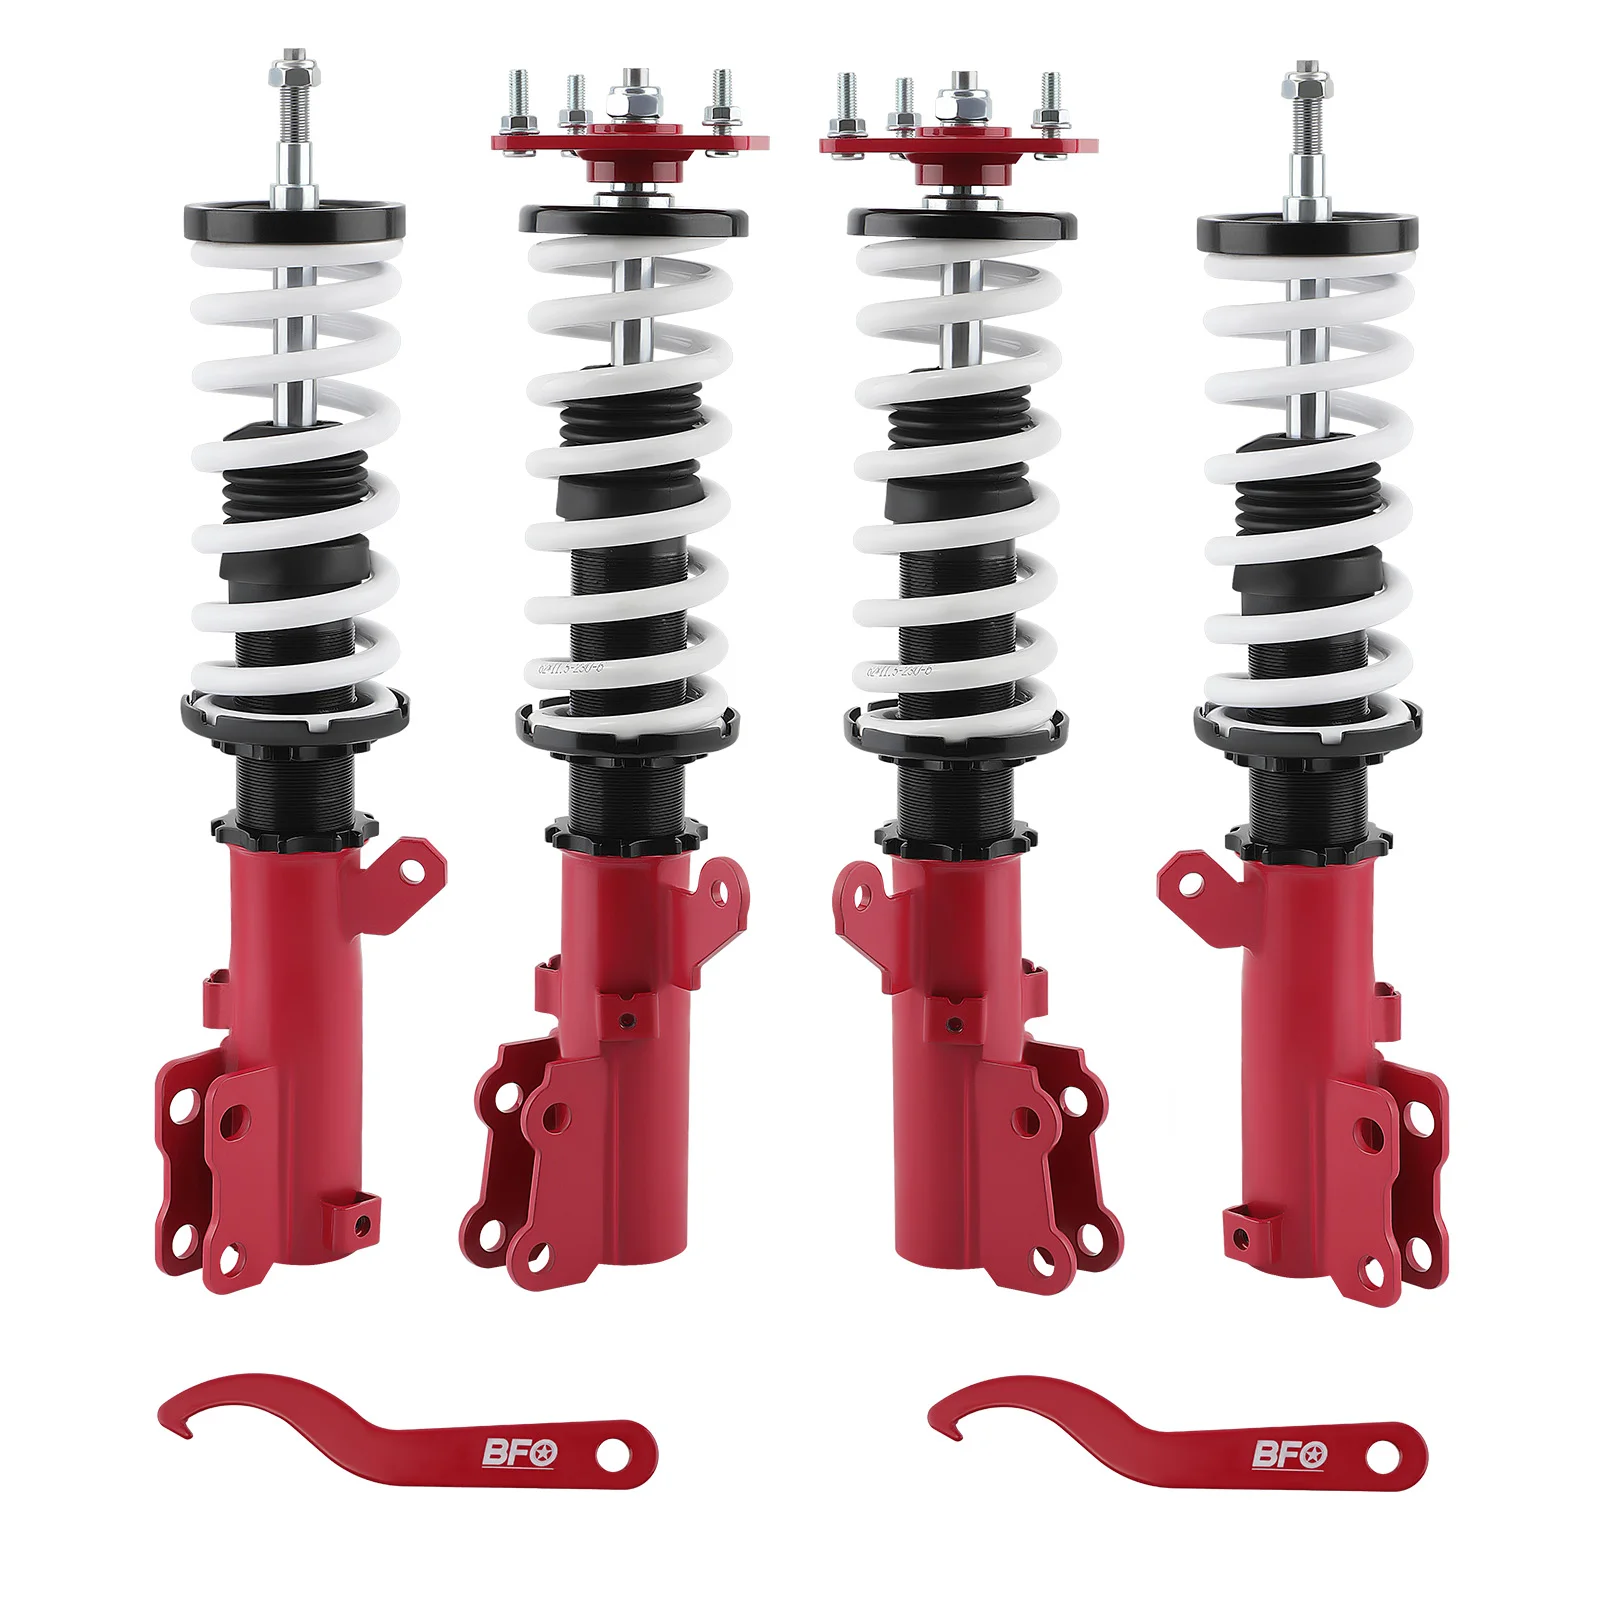 

Street Coilovers for Hyundai Tiburon 2nd. Gen 03-08 Shock Absorbers Adjustable Height Shocks Coilovers Lowering Suspension Kit